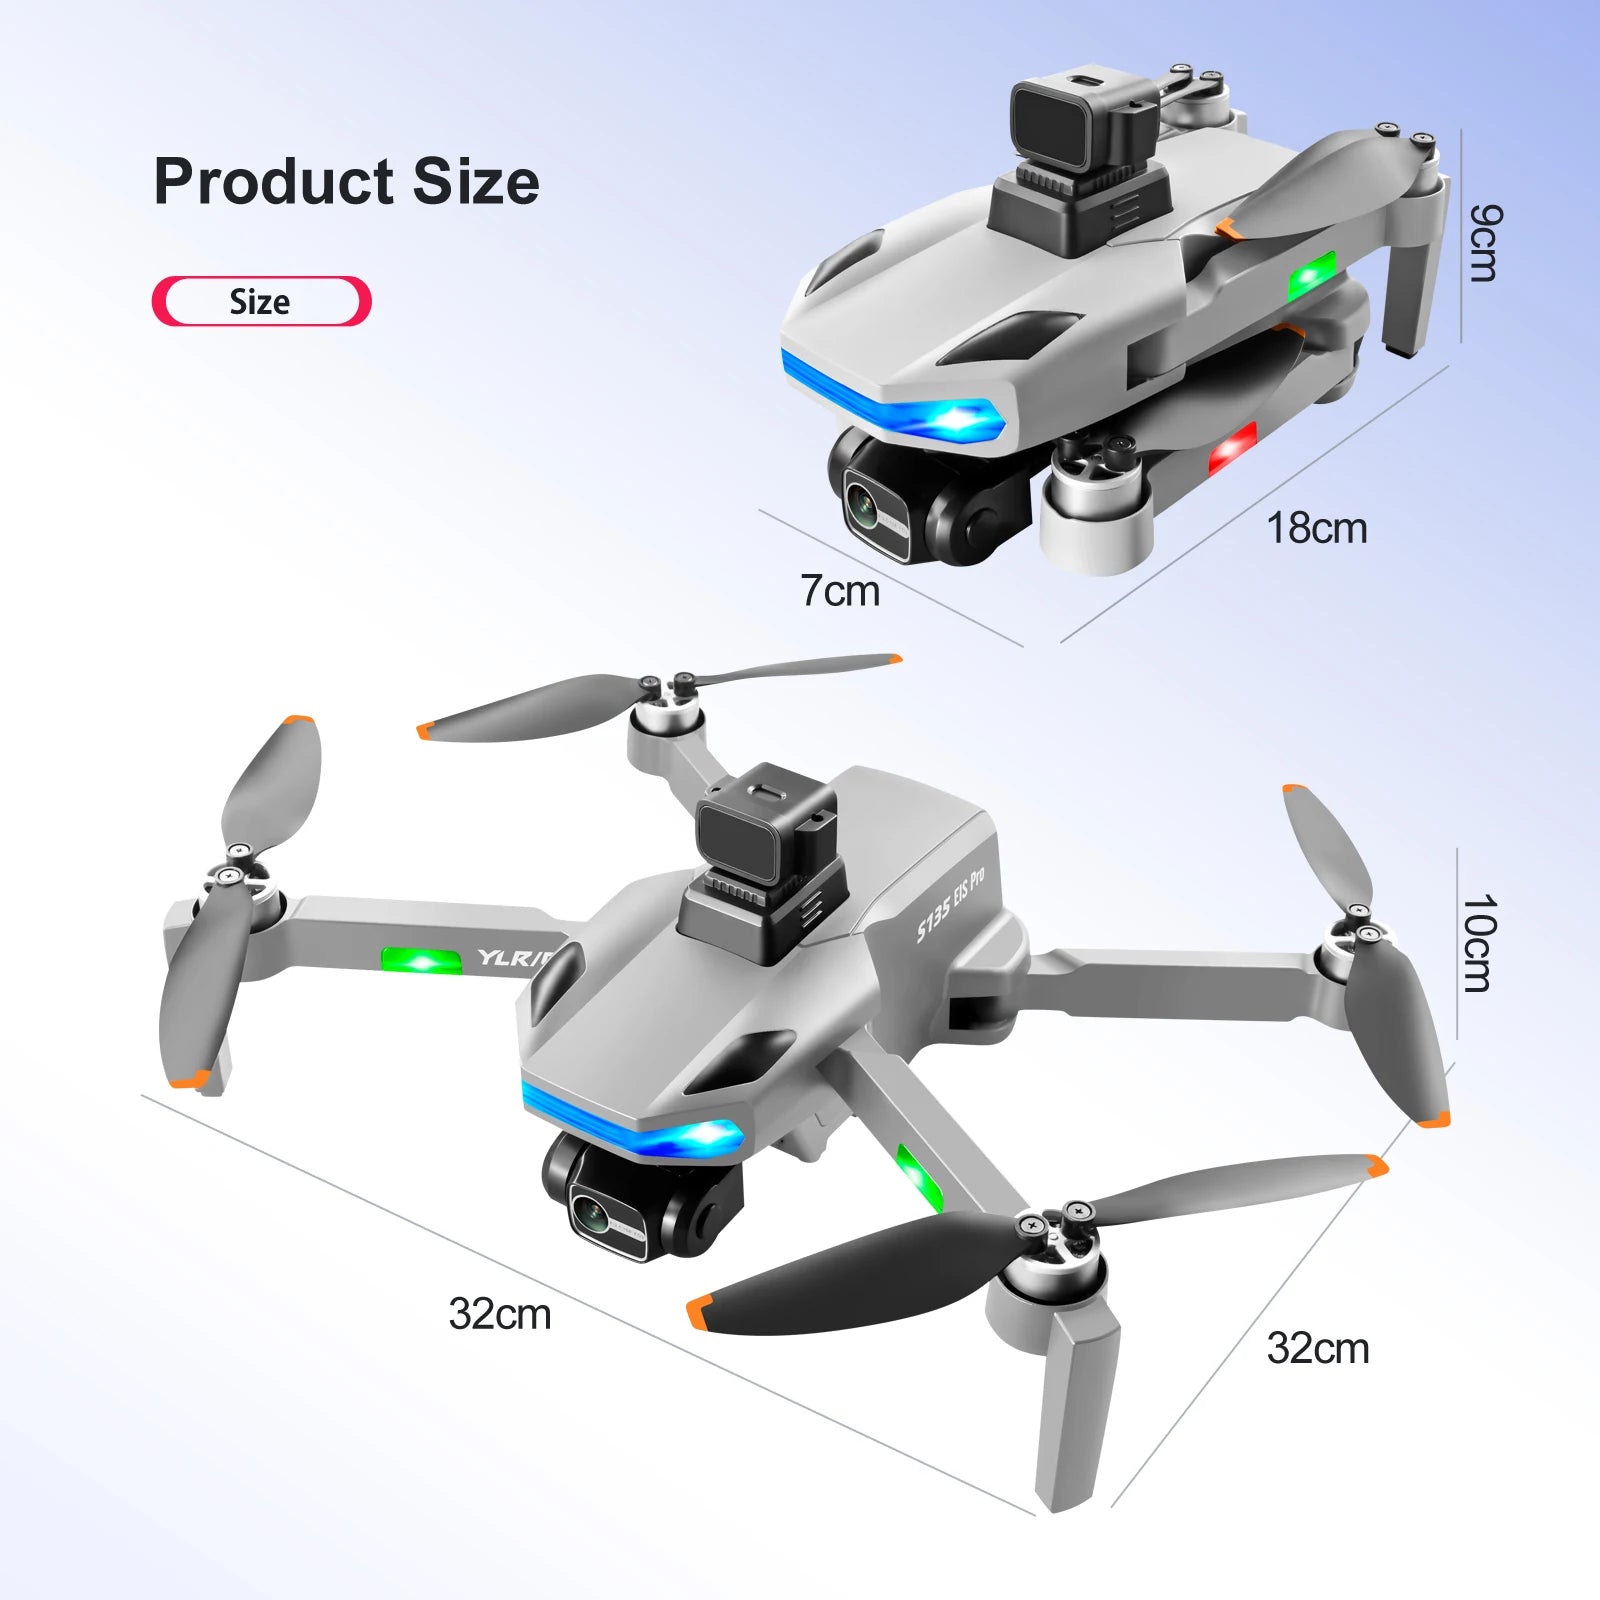 S135 Drone, drone can automatically follow you in precise circles or around points you set 